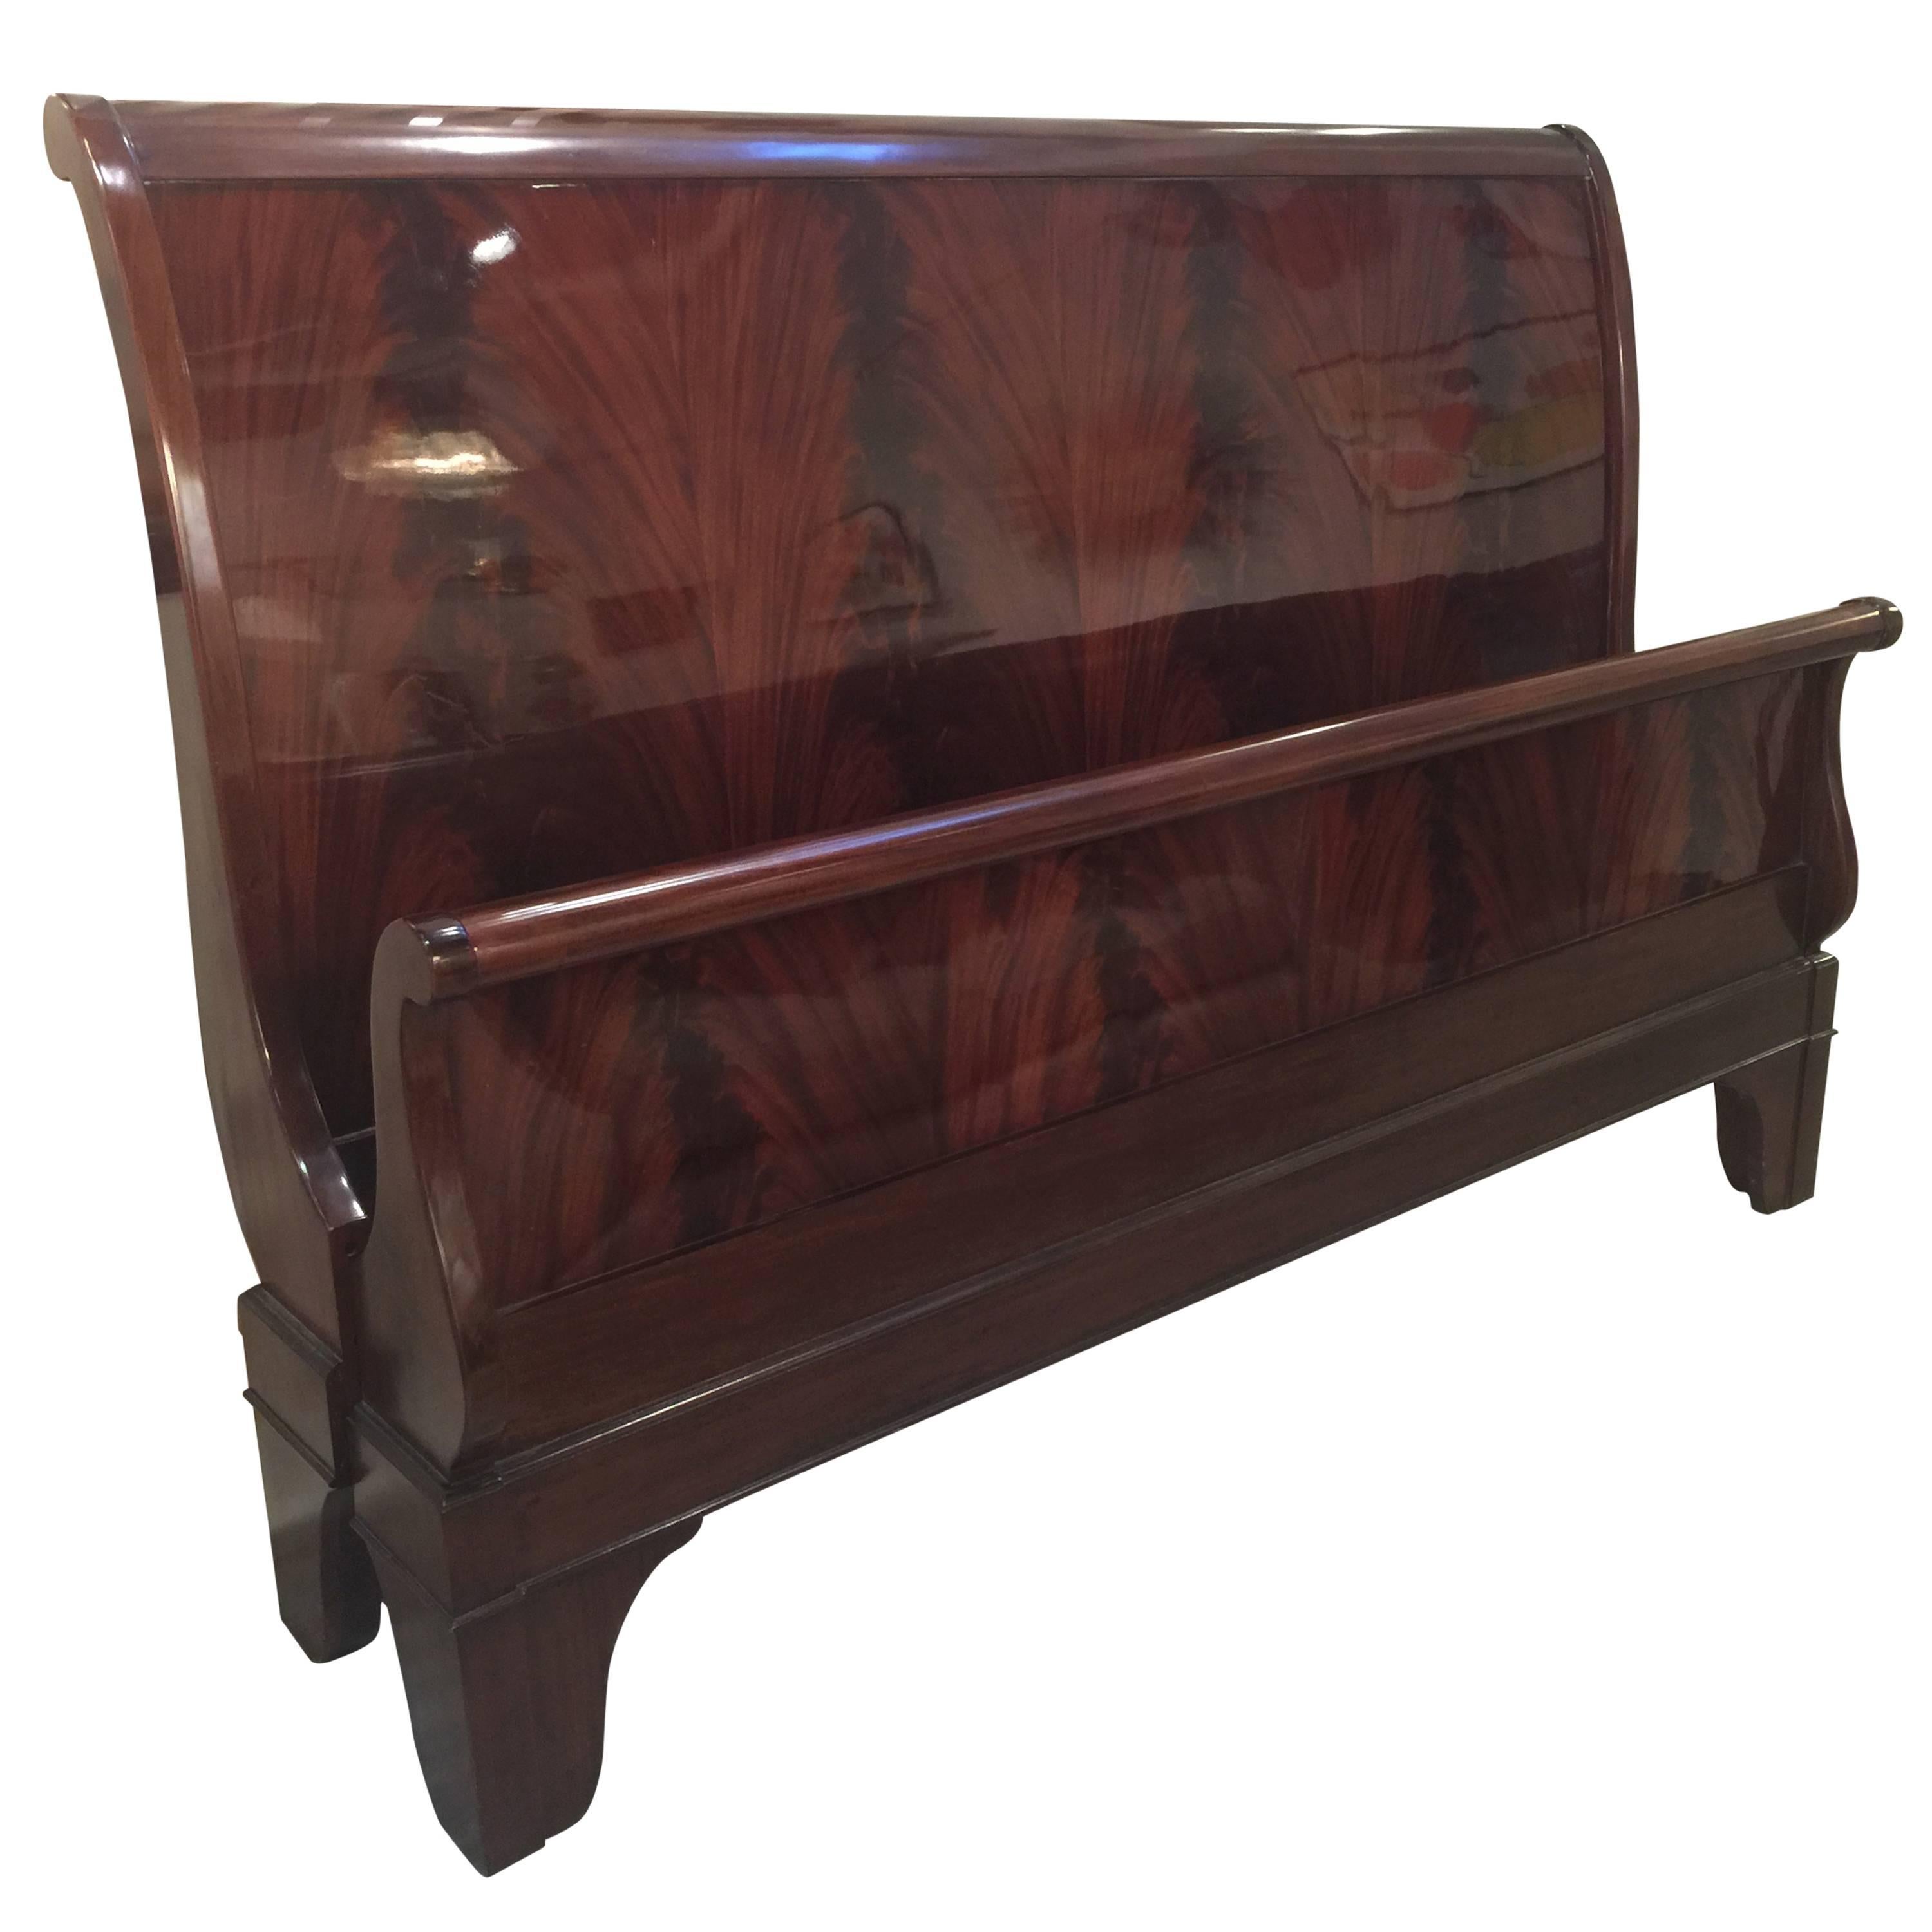 King Size Flame Mahogany Sleigh Bed